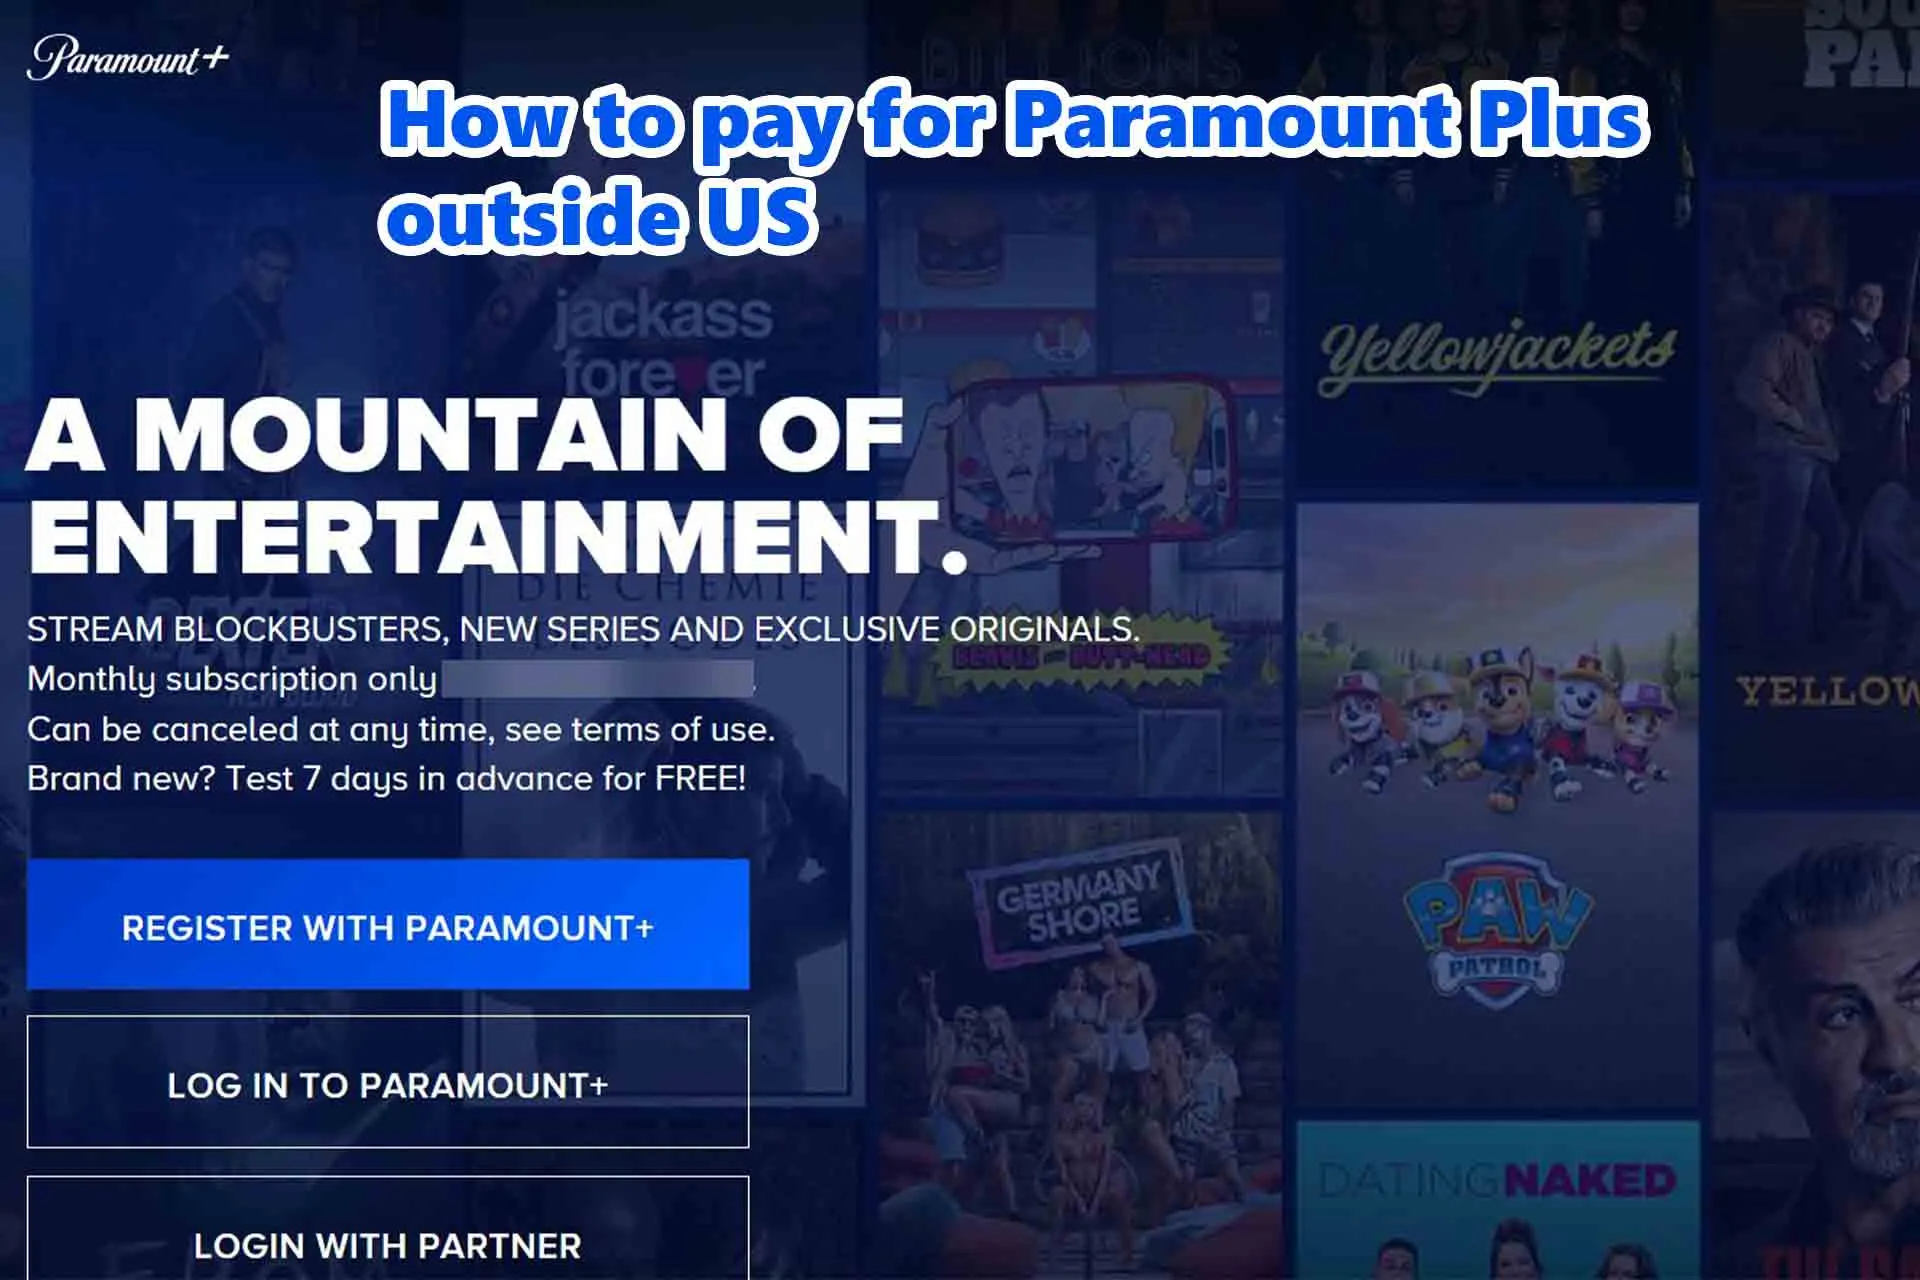 How to pay for Paramount Plus outside US